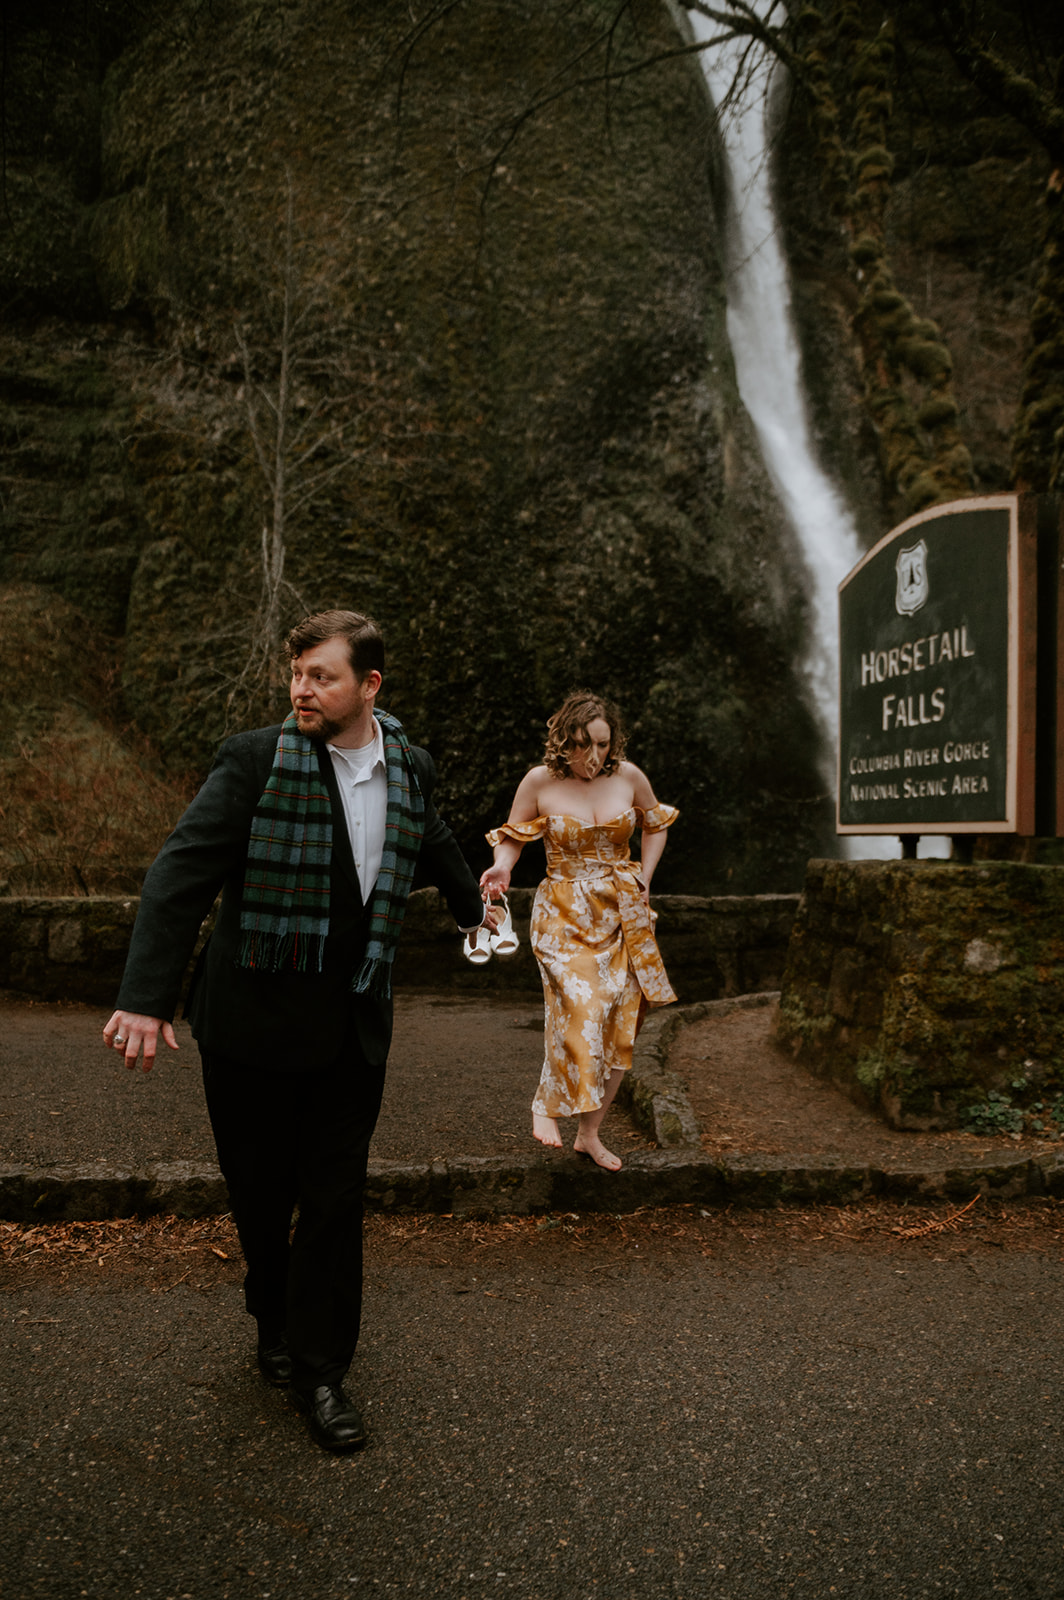 A couple walking across the street dressed in formal clothes at horsetail falls